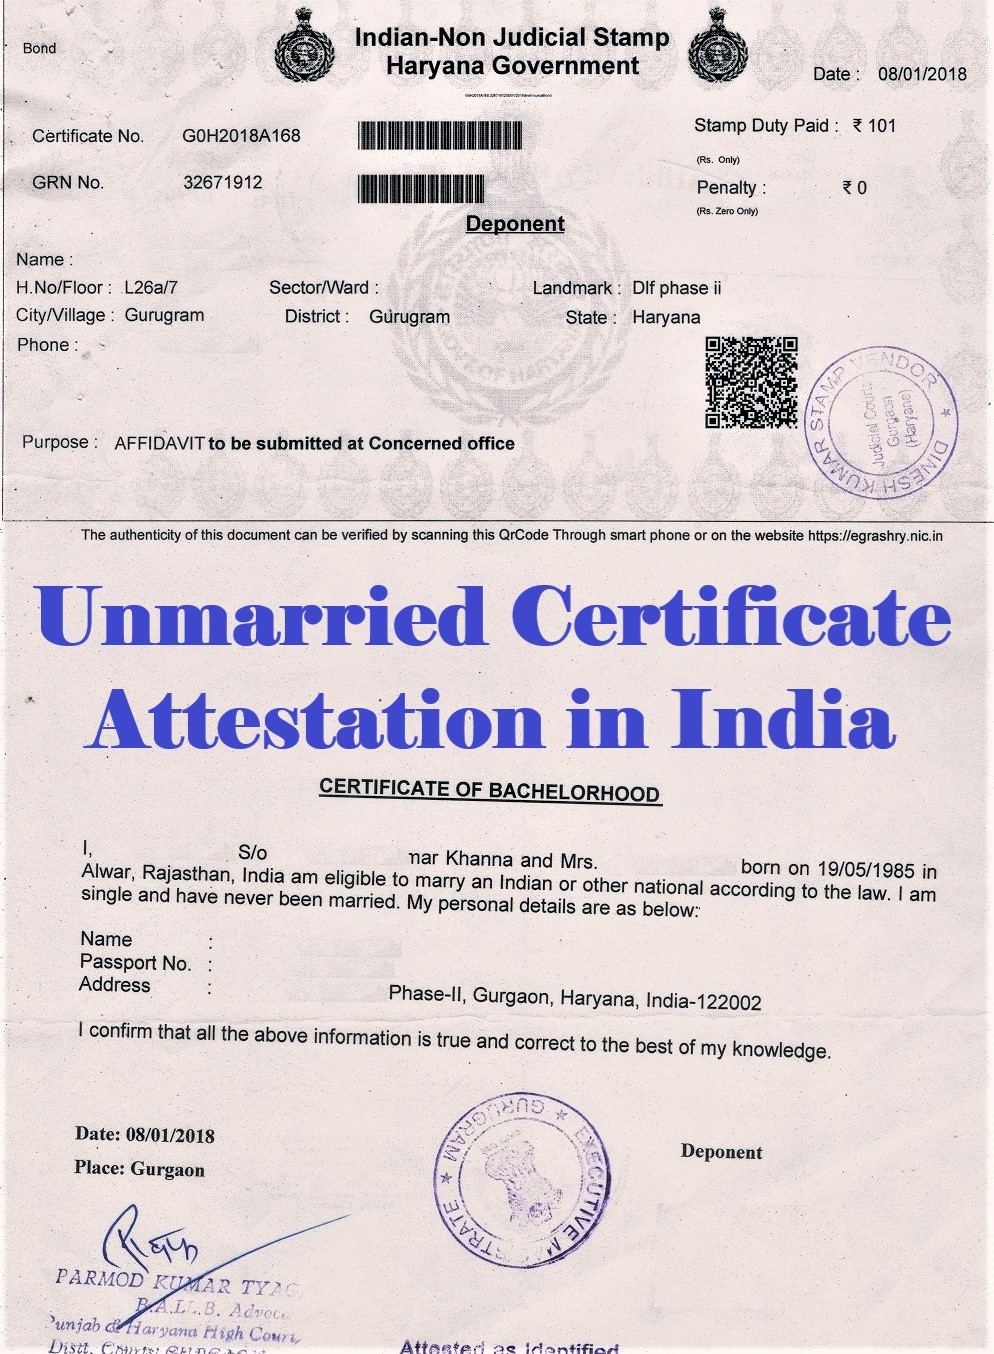 Unmarried Certificate Attestation from Barbados Embassy